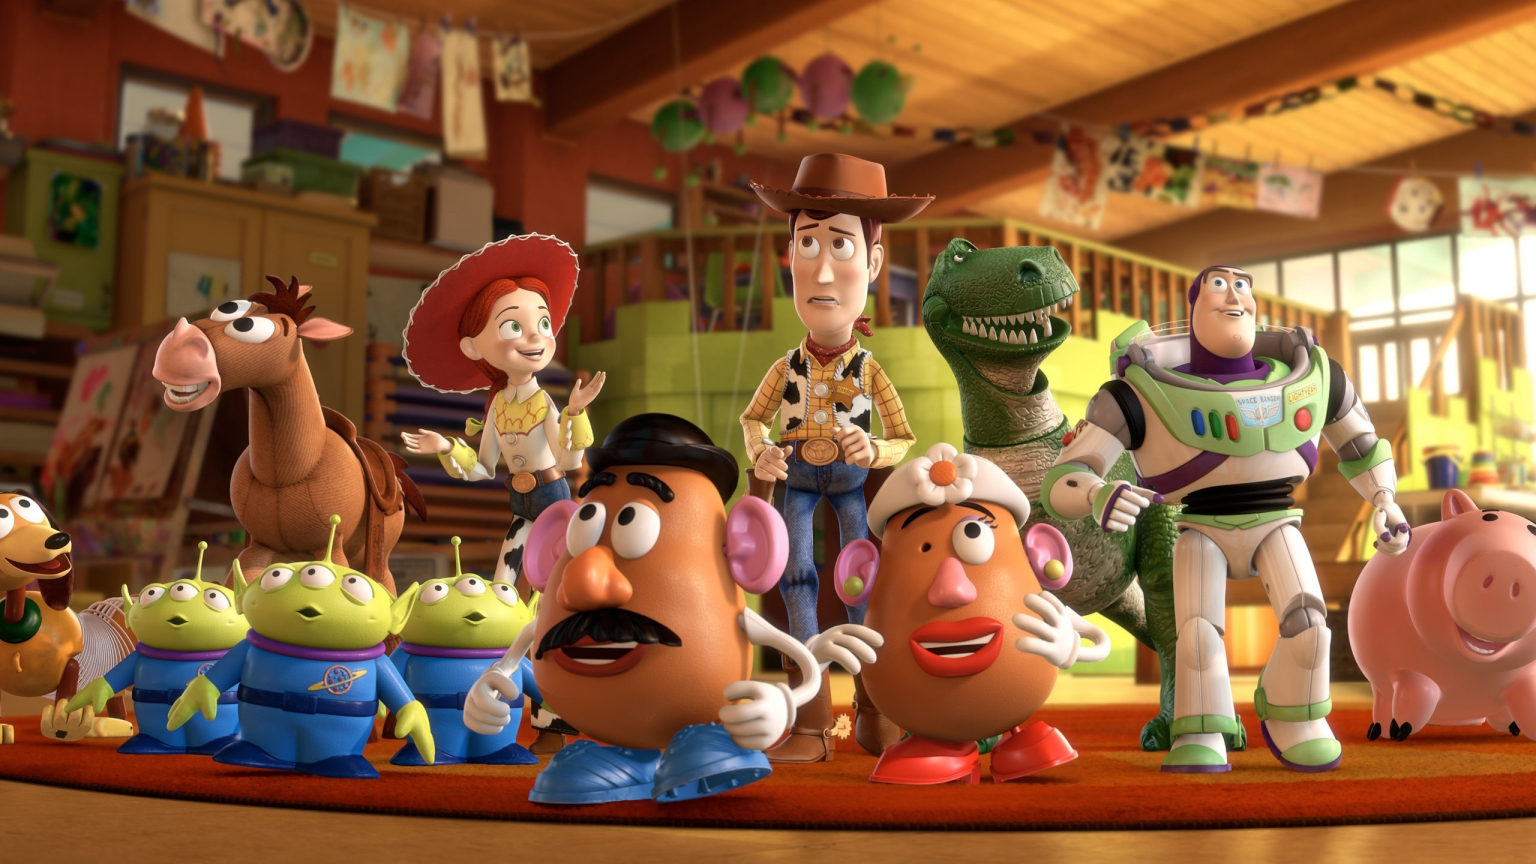 Toy Story 3 Cast for 1536 x 864 HDTV resolution